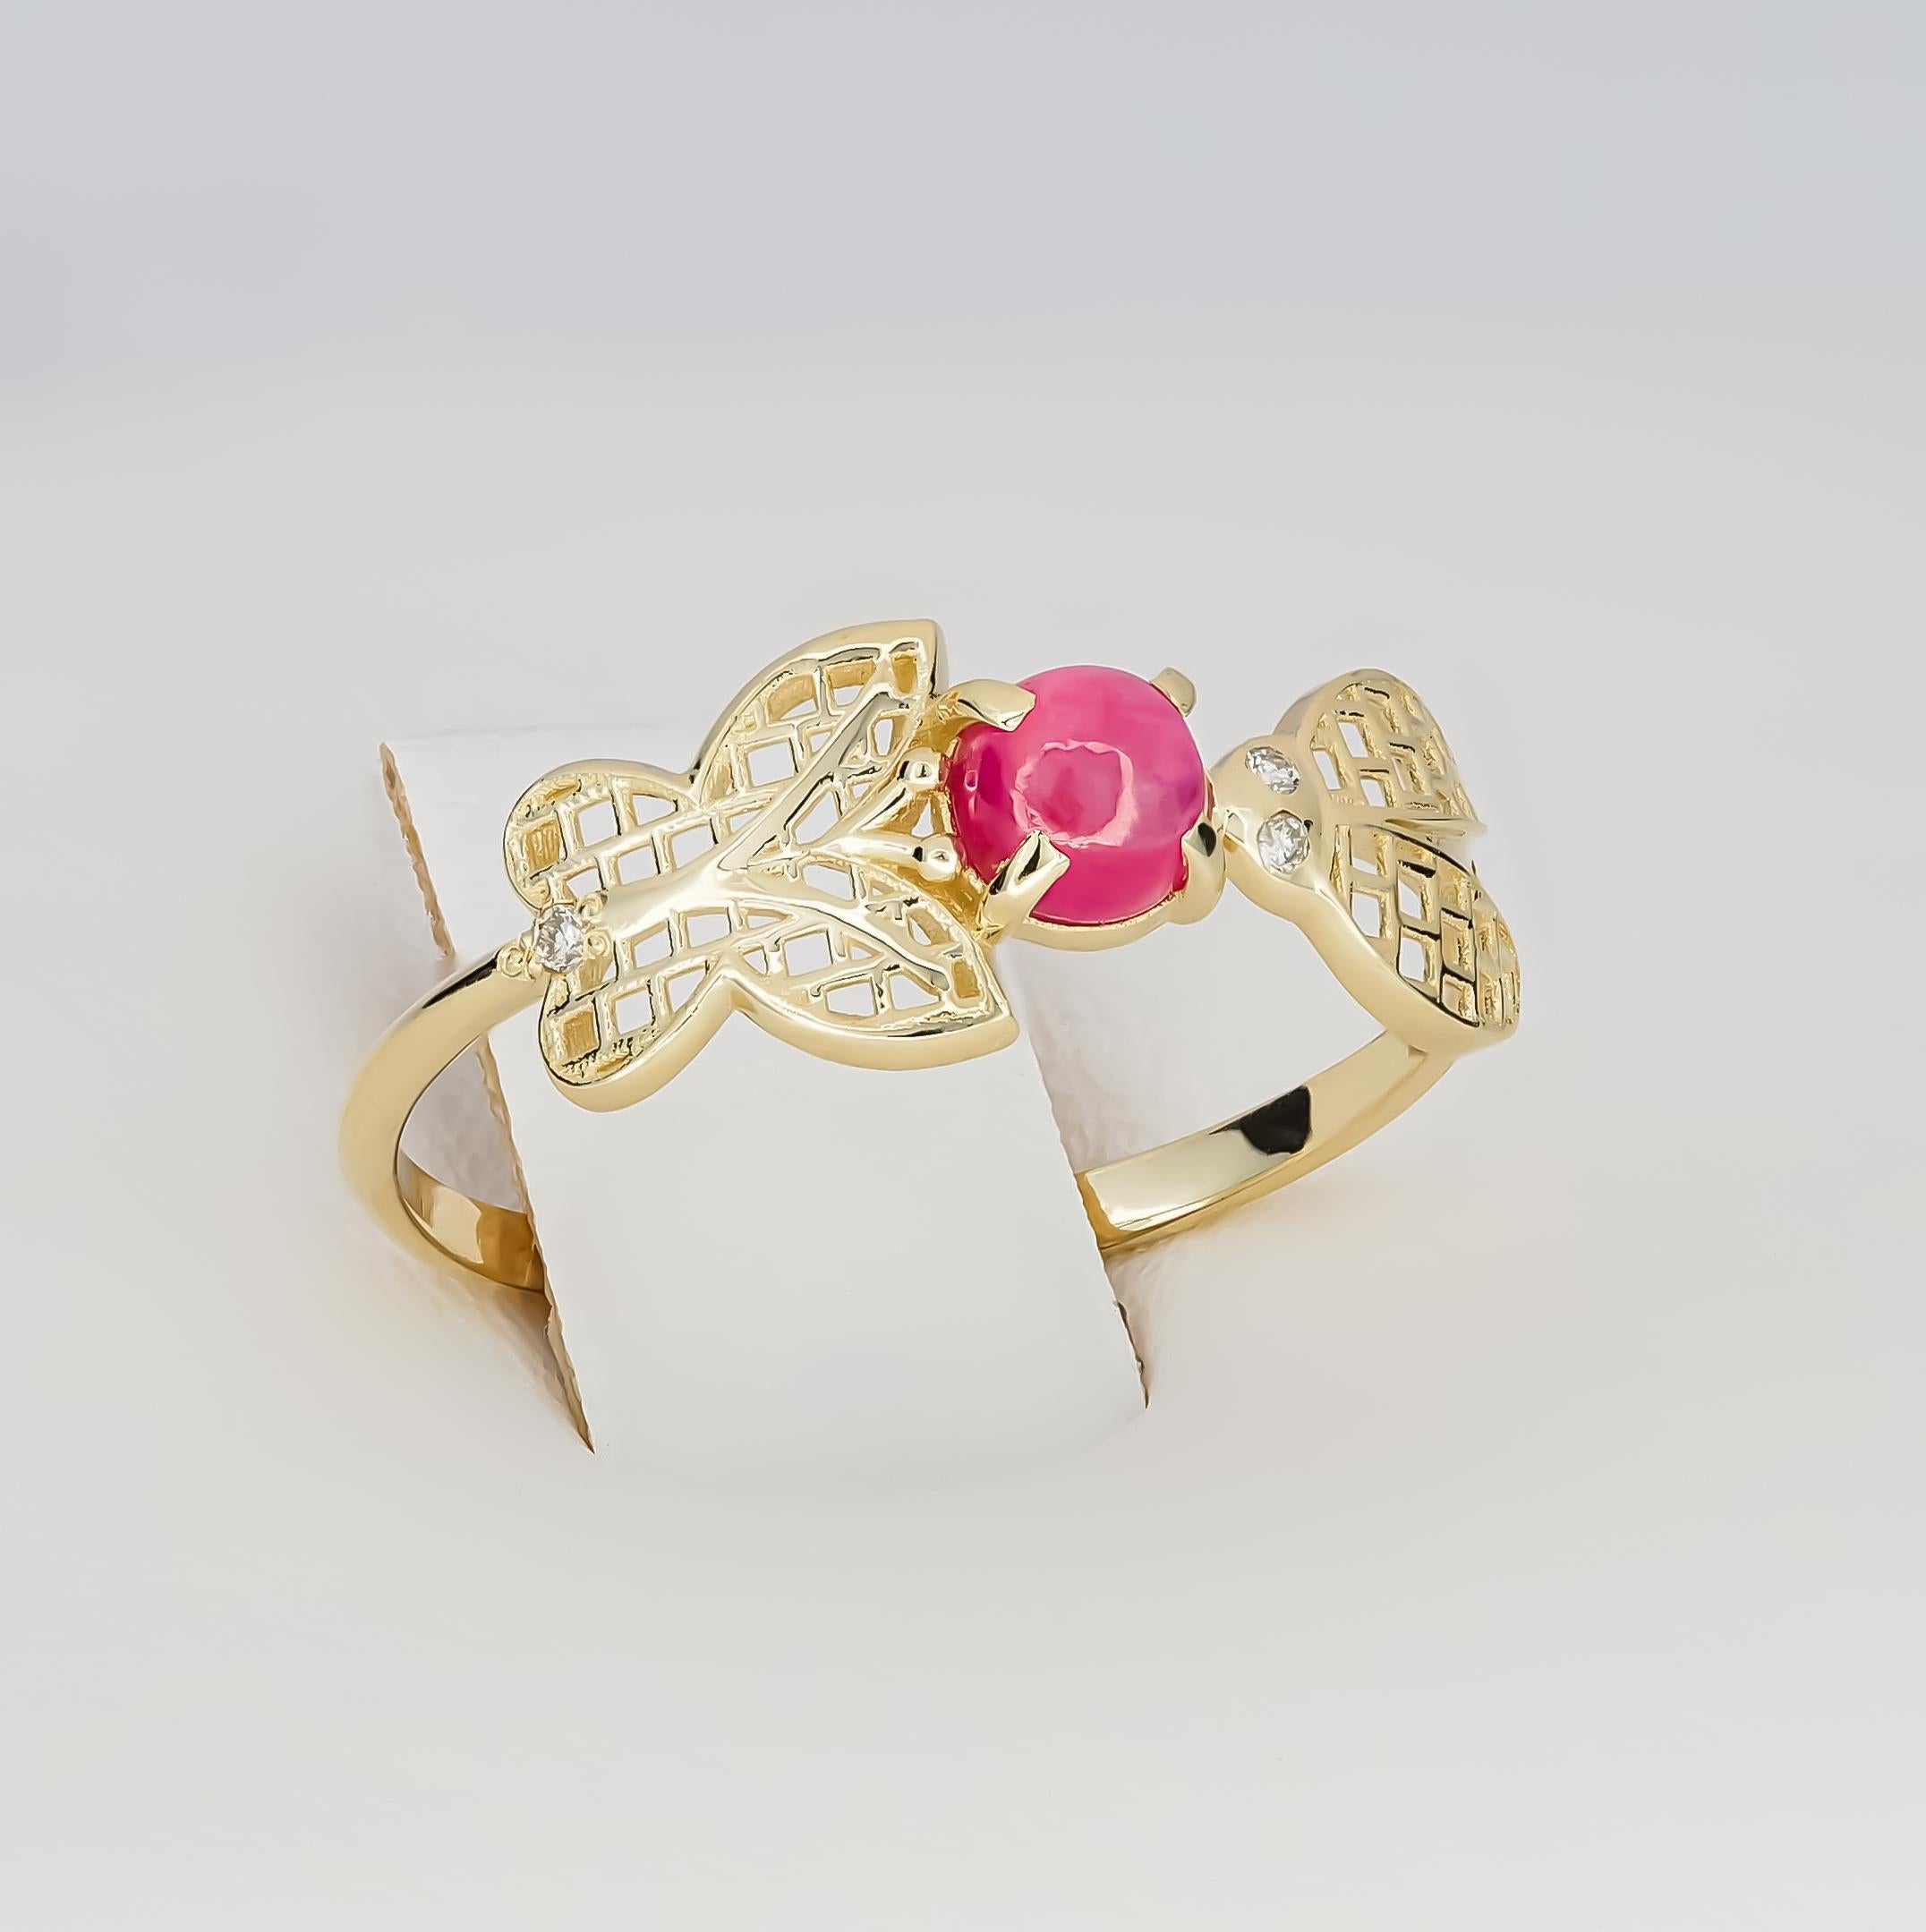 Modern 14 Karat Gold Ring with Ruby and Diamonds. July birthstone ruby ring